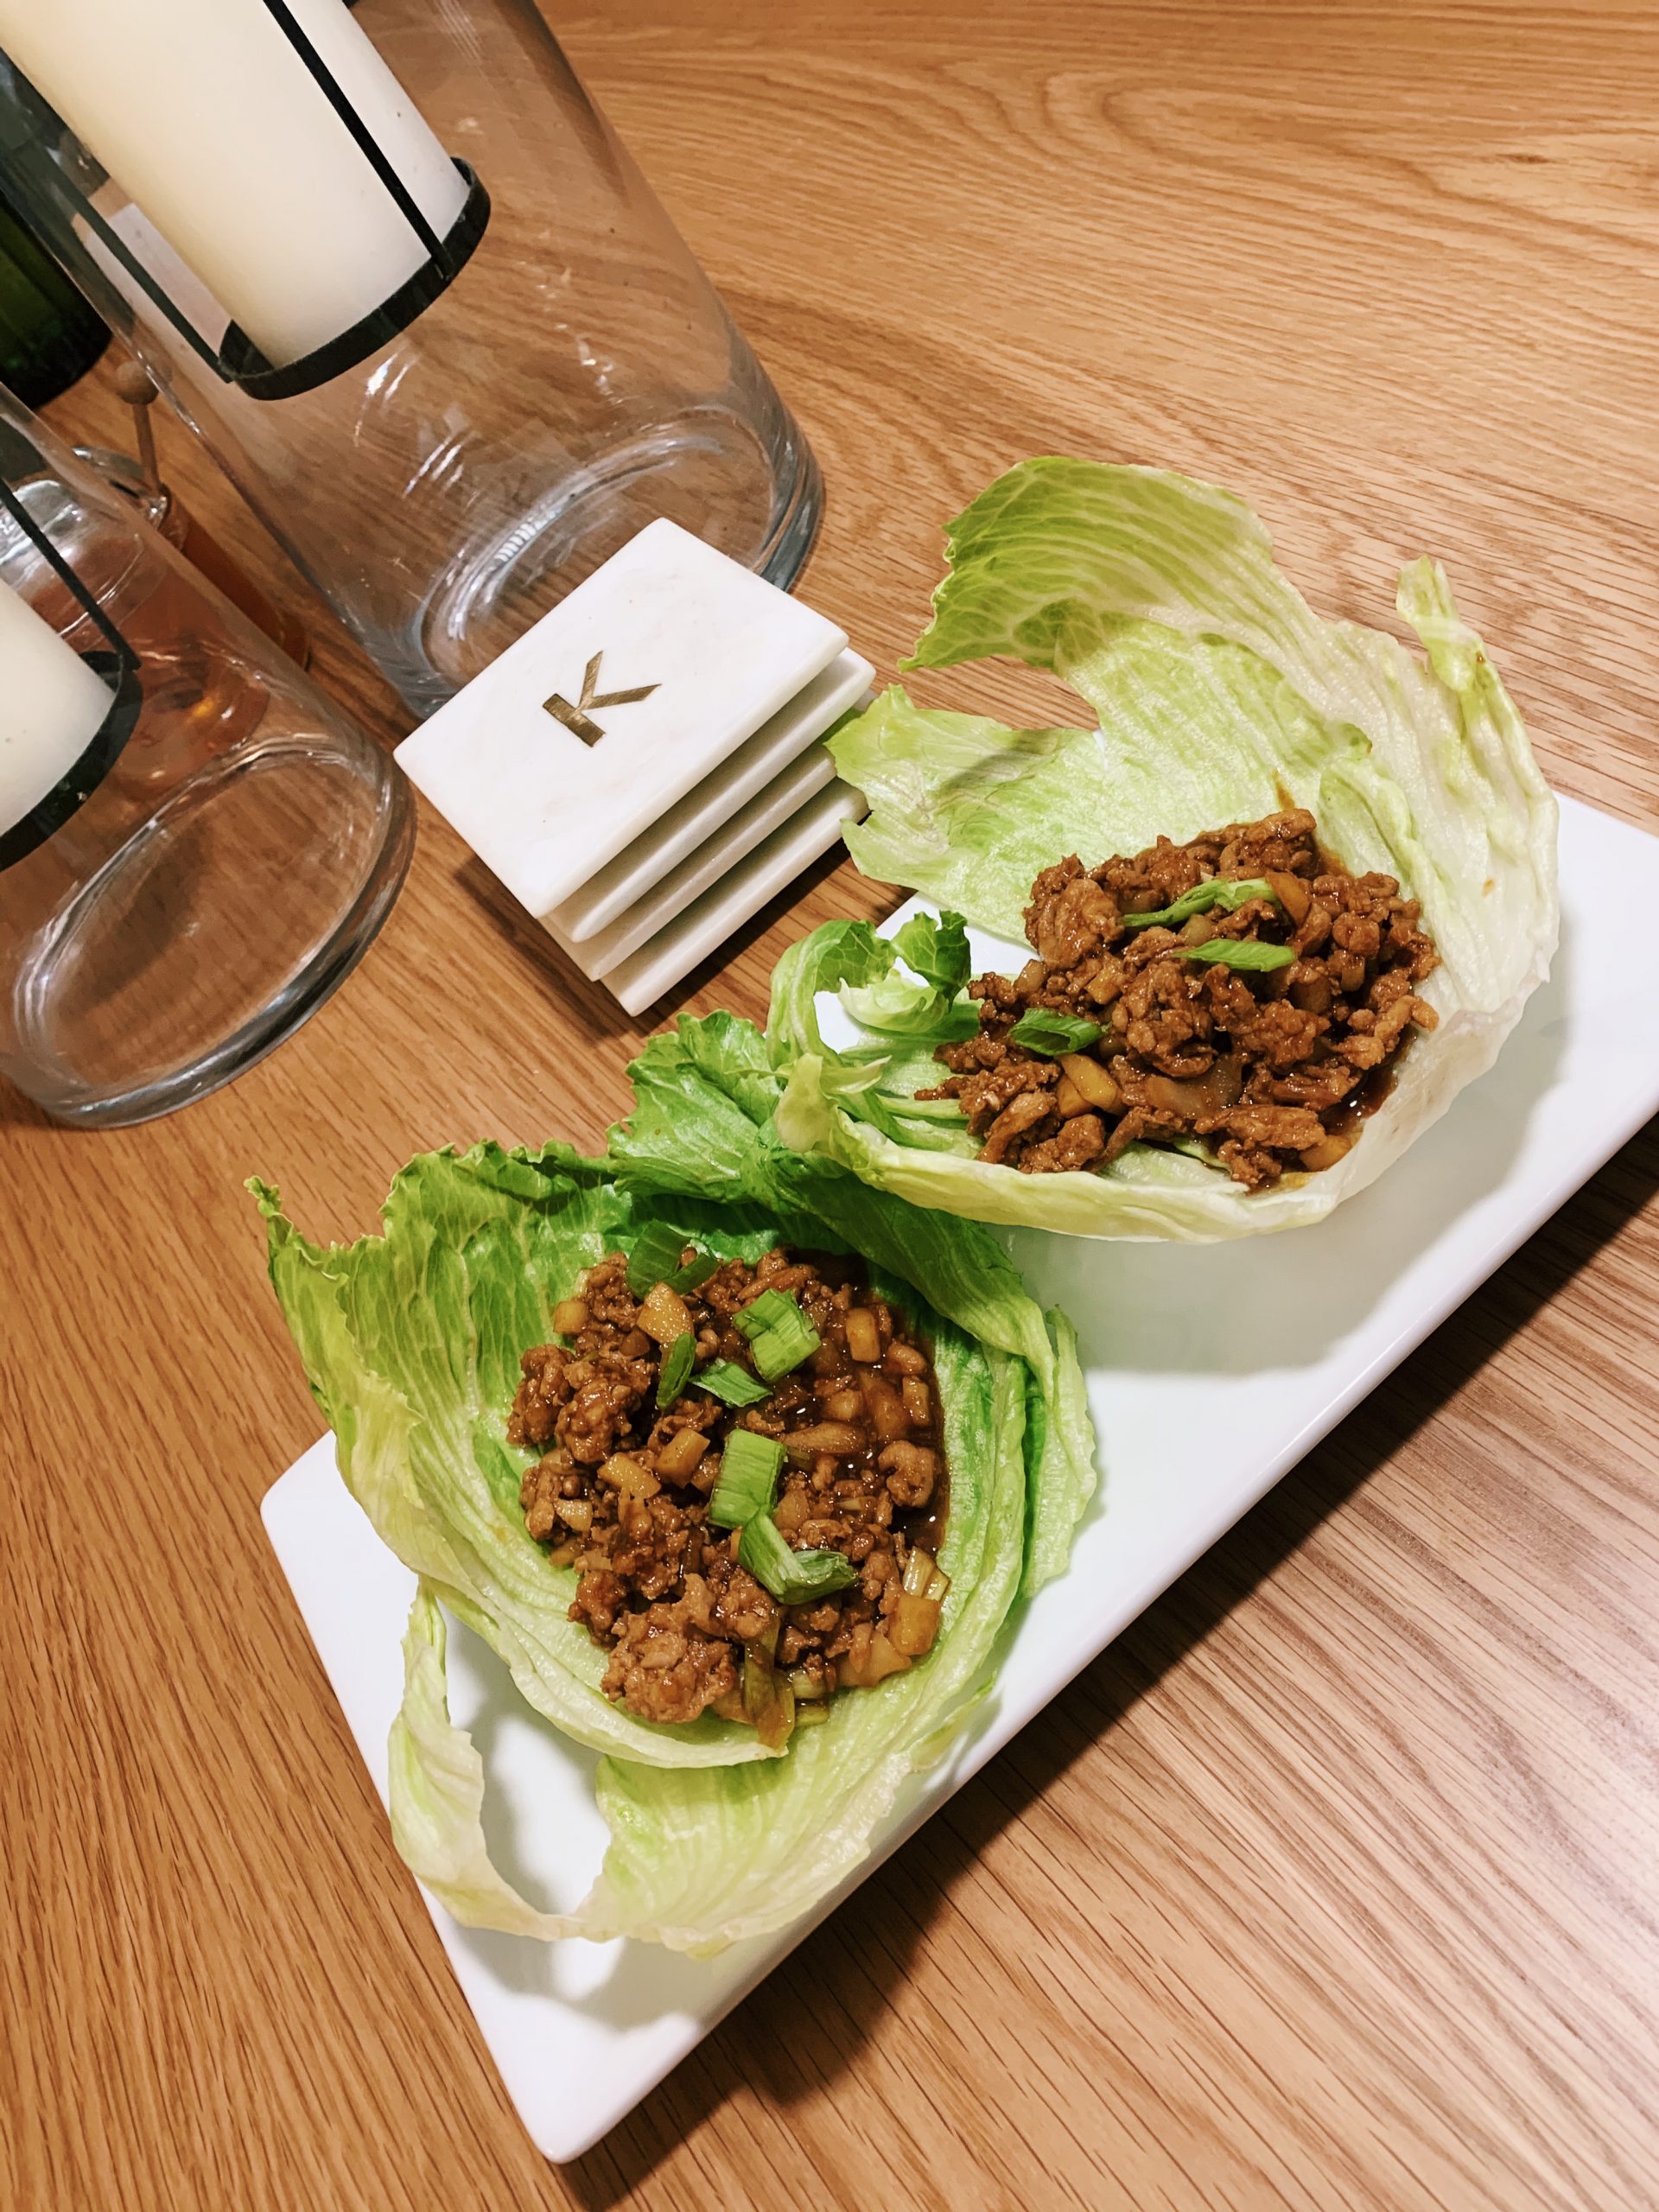 6A417BB6-8BEC-4BB0-9A9C-047BFABE0FAC-768x1024 Best P.F. Chang's Copycat Lettuce Wrap Recipe - Home Meals To Cook